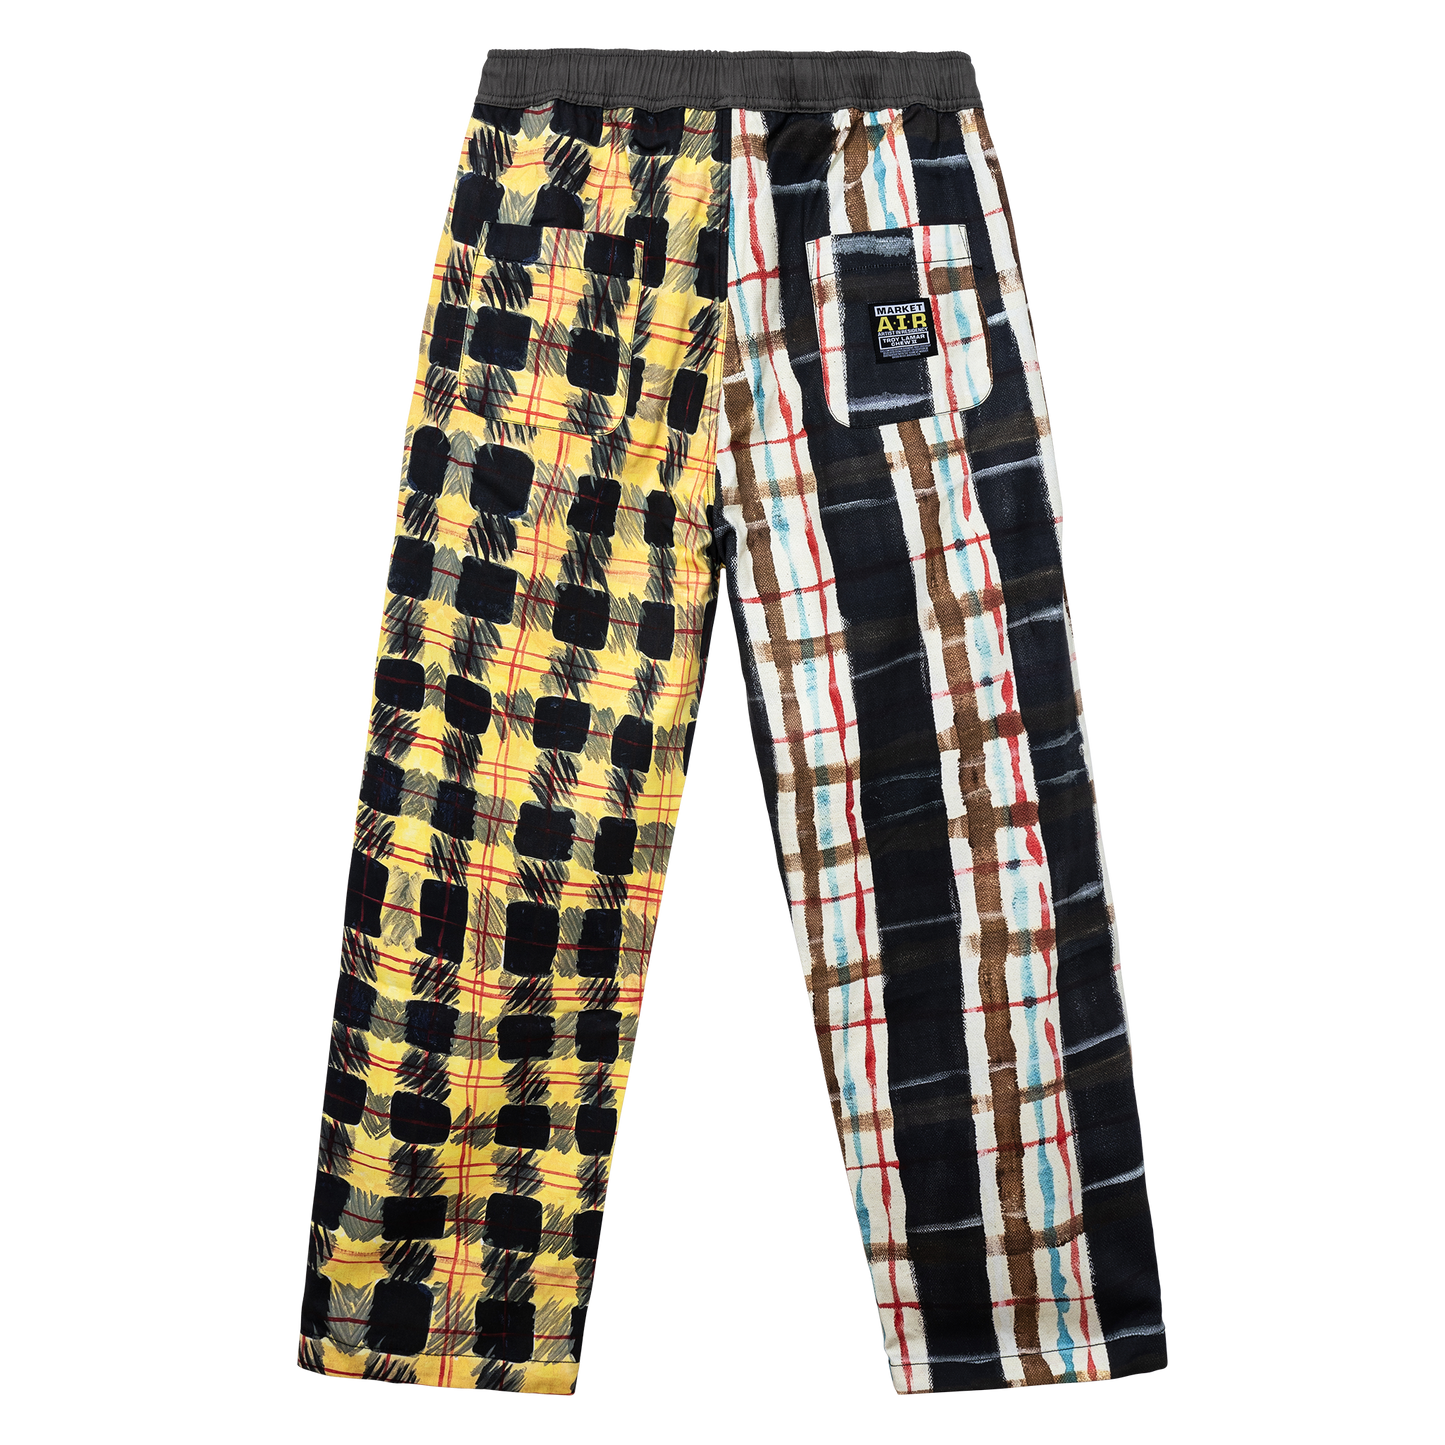 MARKET clothing brand MARKET AIR TROY PLAID PANT. Find more graphic tees, sweatpants, shorts and more bottoms at MarketStudios.com. Formally Chinatown Market. 